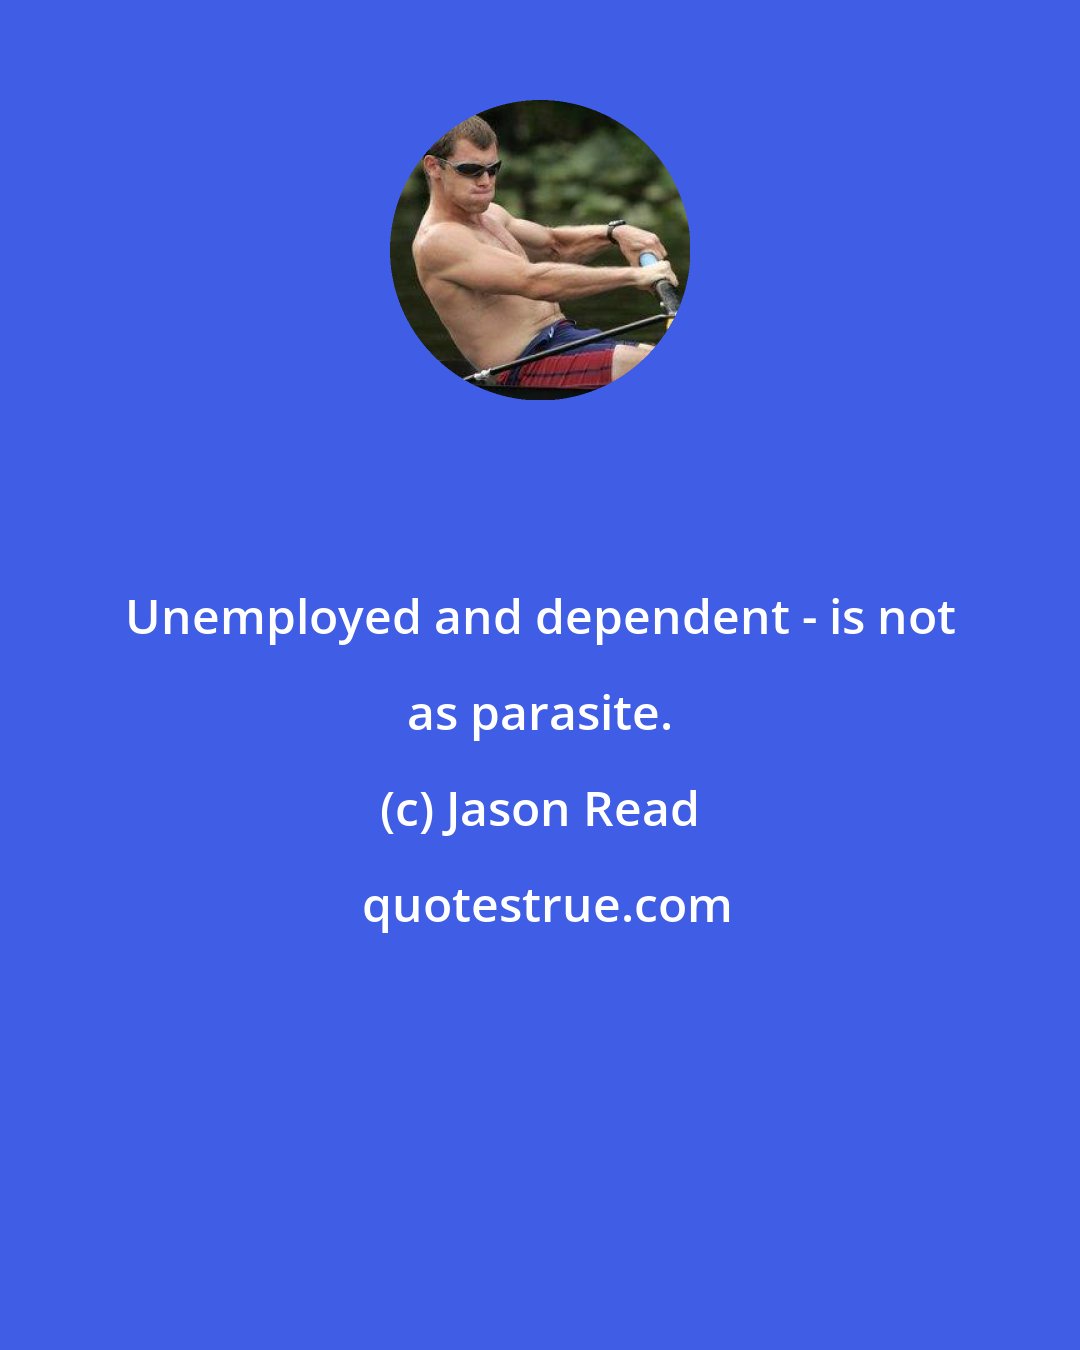 Jason Read: Unemployed and dependent - is not as parasite.